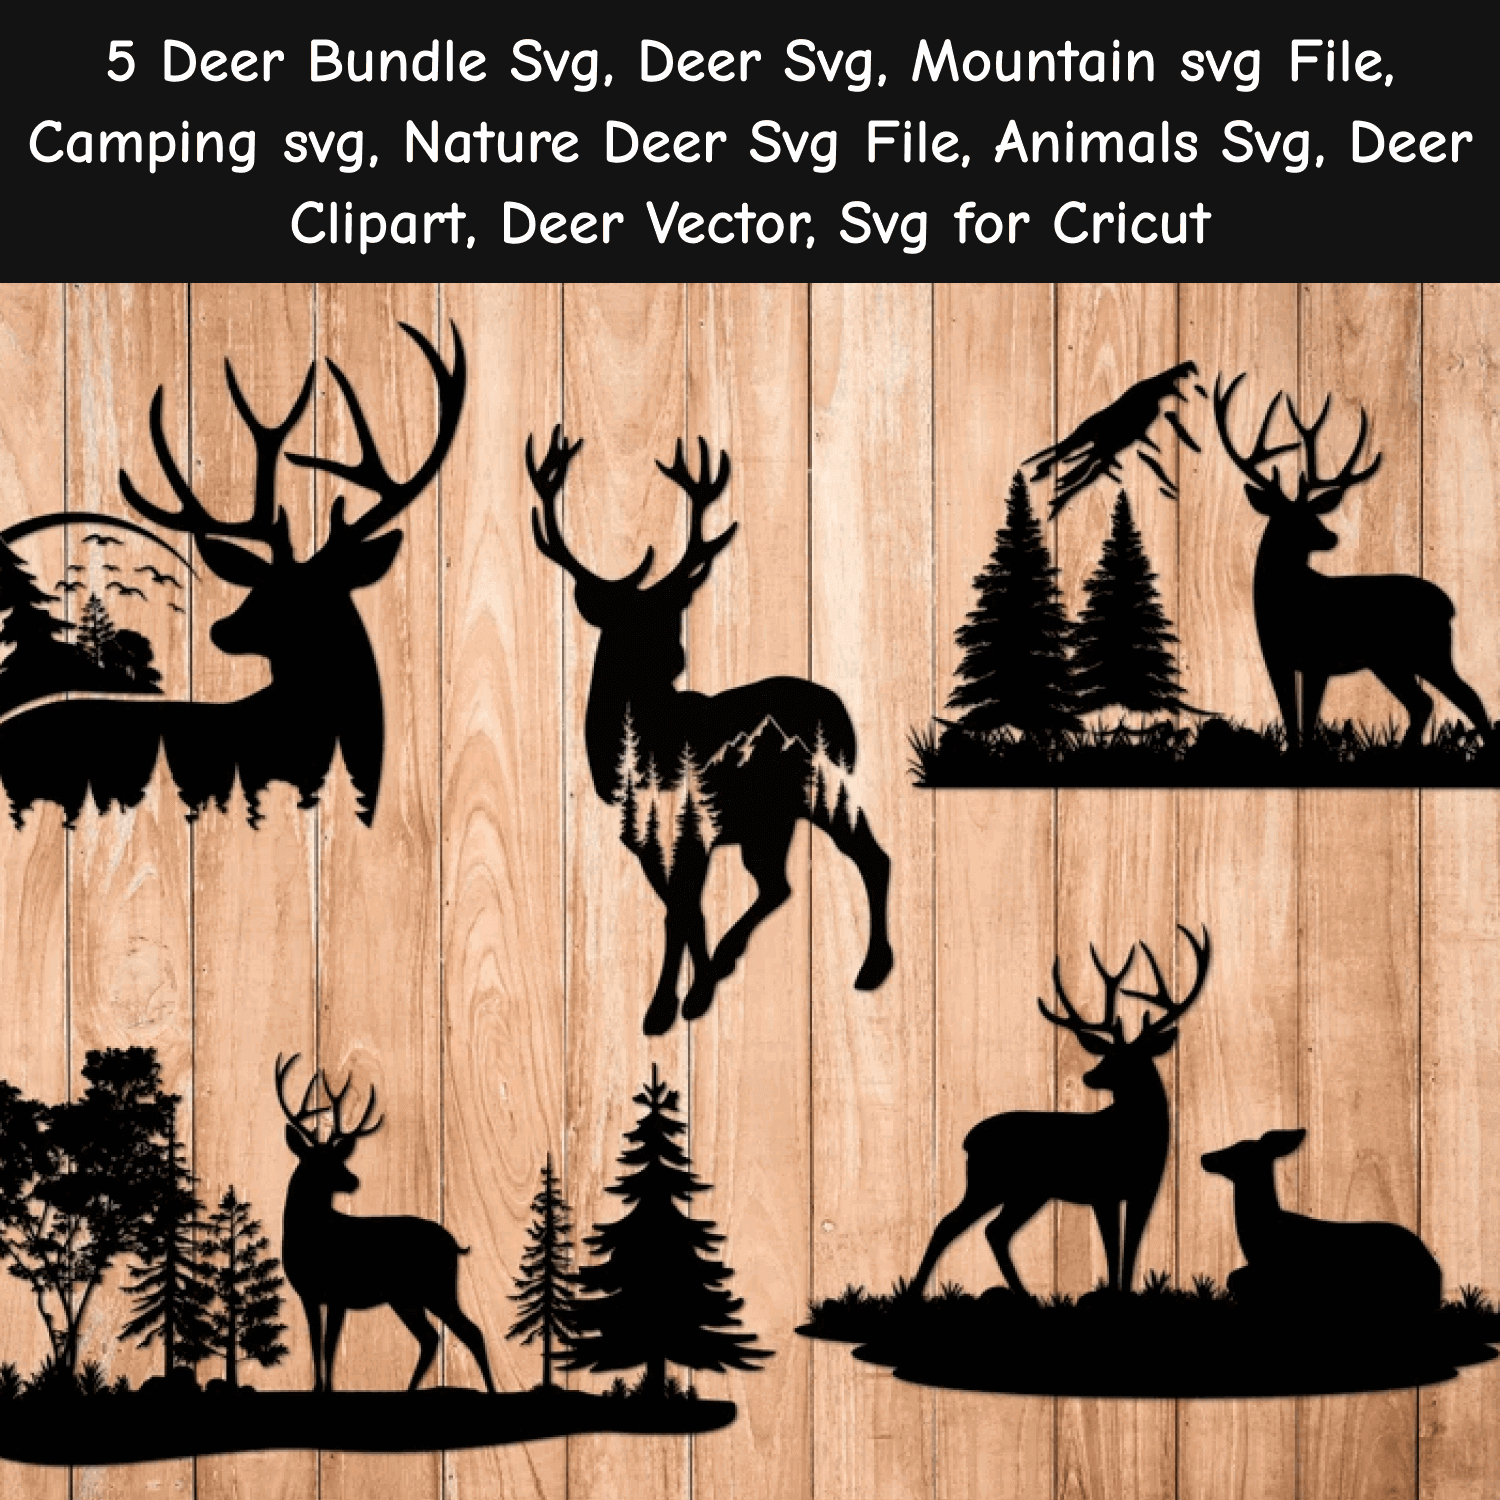 Deer silhouettes and trees on a wooden background.